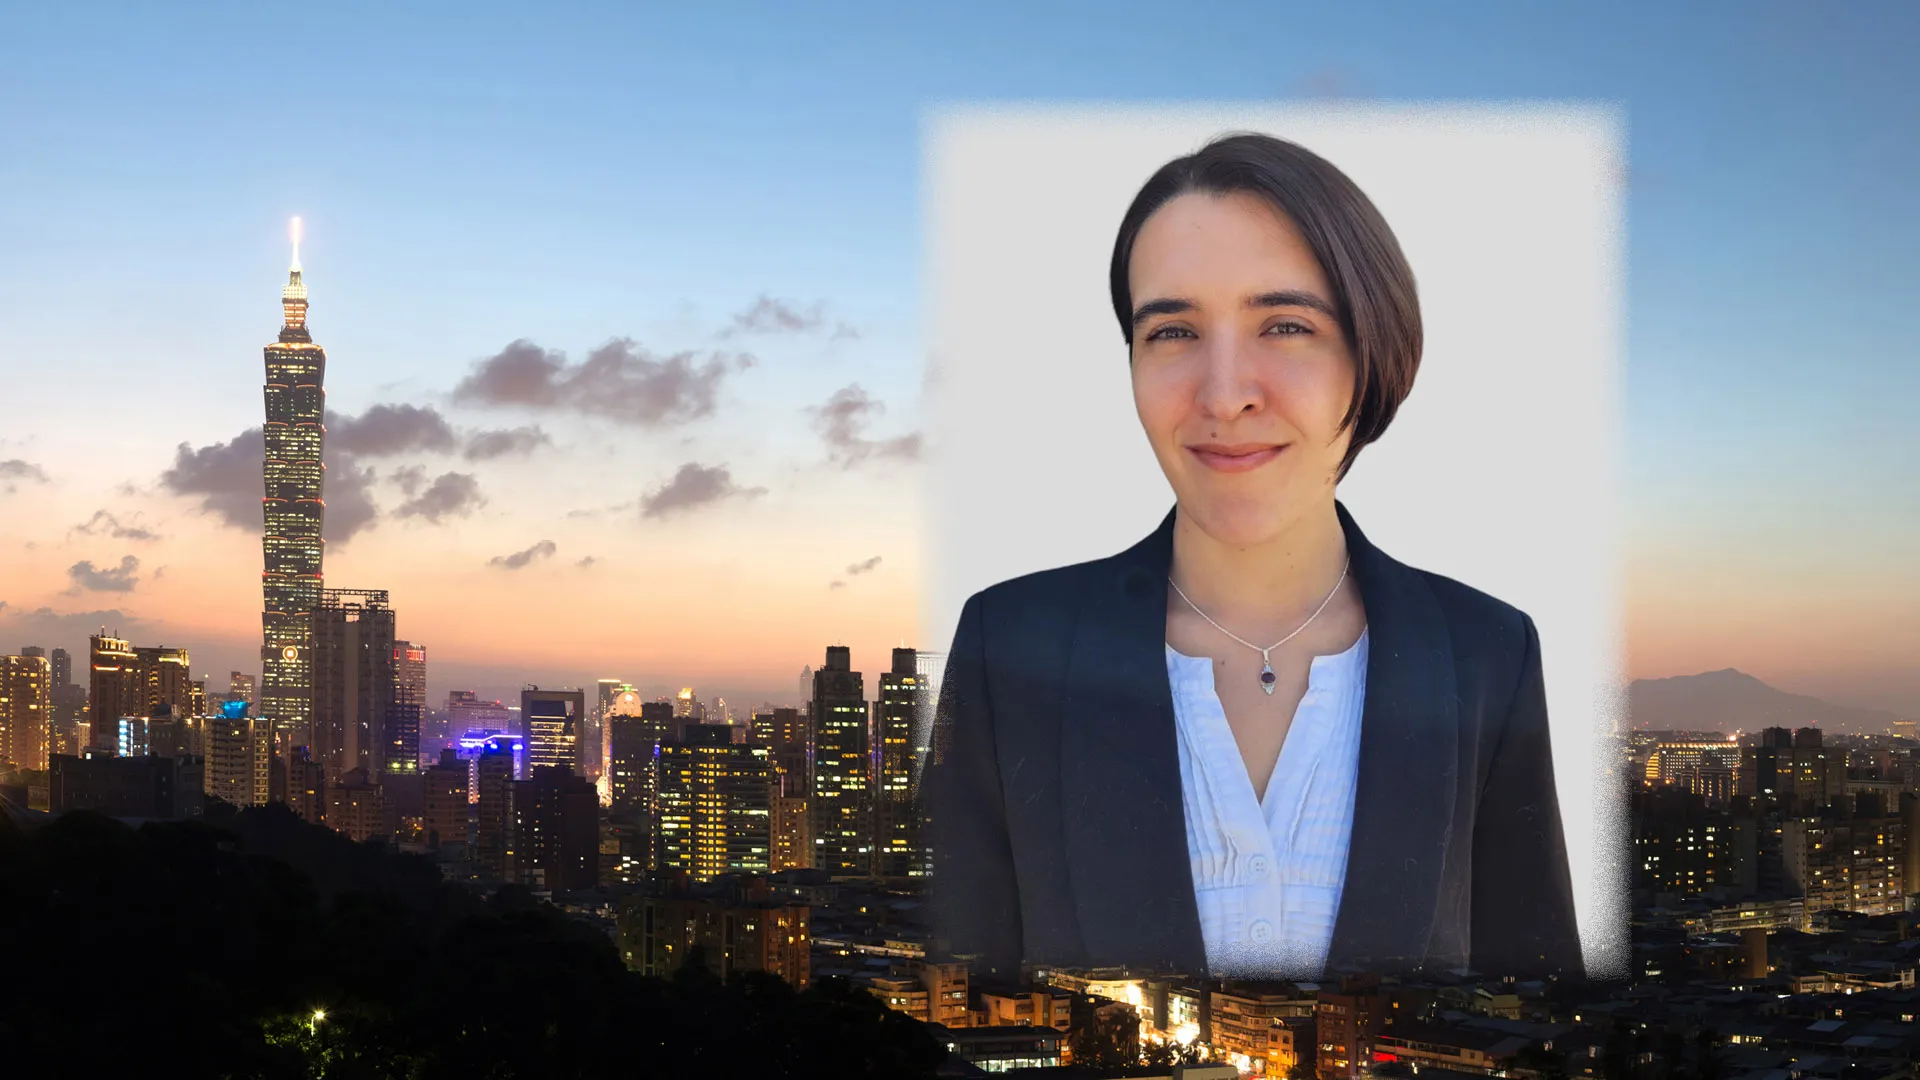 Sarah LaGioia will travel to Taiwan for the 2022-23 academic year on a Fulbright U.S. Student Program award. In the background, the skyline of Taipei, Taiwan.